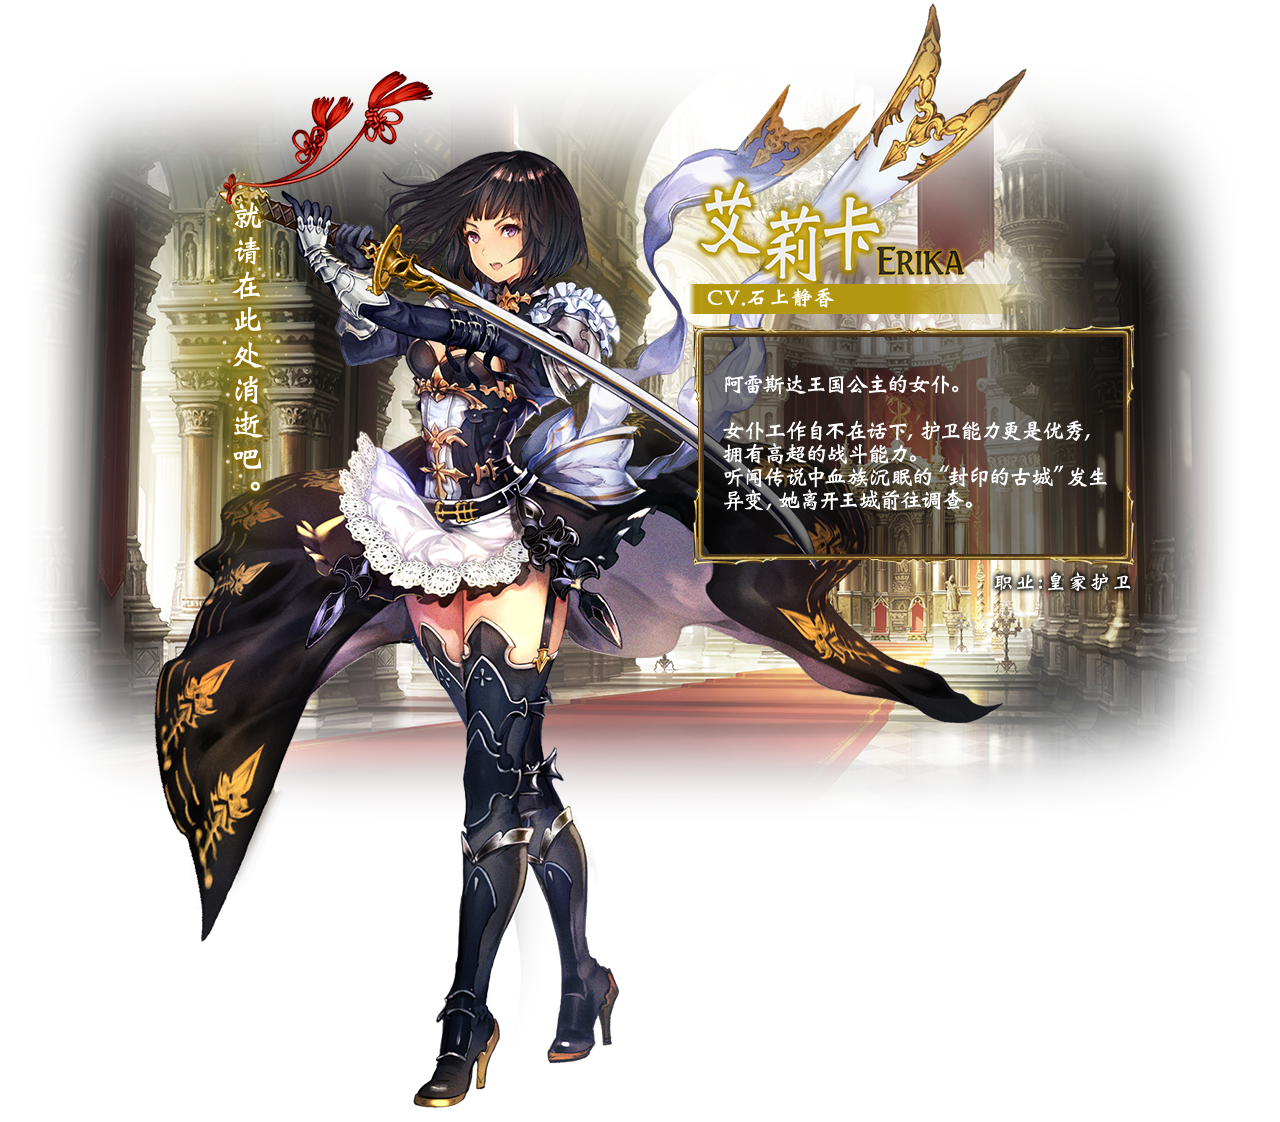 Erika / Class: Swordcraft / Erika is the sword-wielding protector to the princess. She left the castle to investigate an infamous vampire's final resting place.